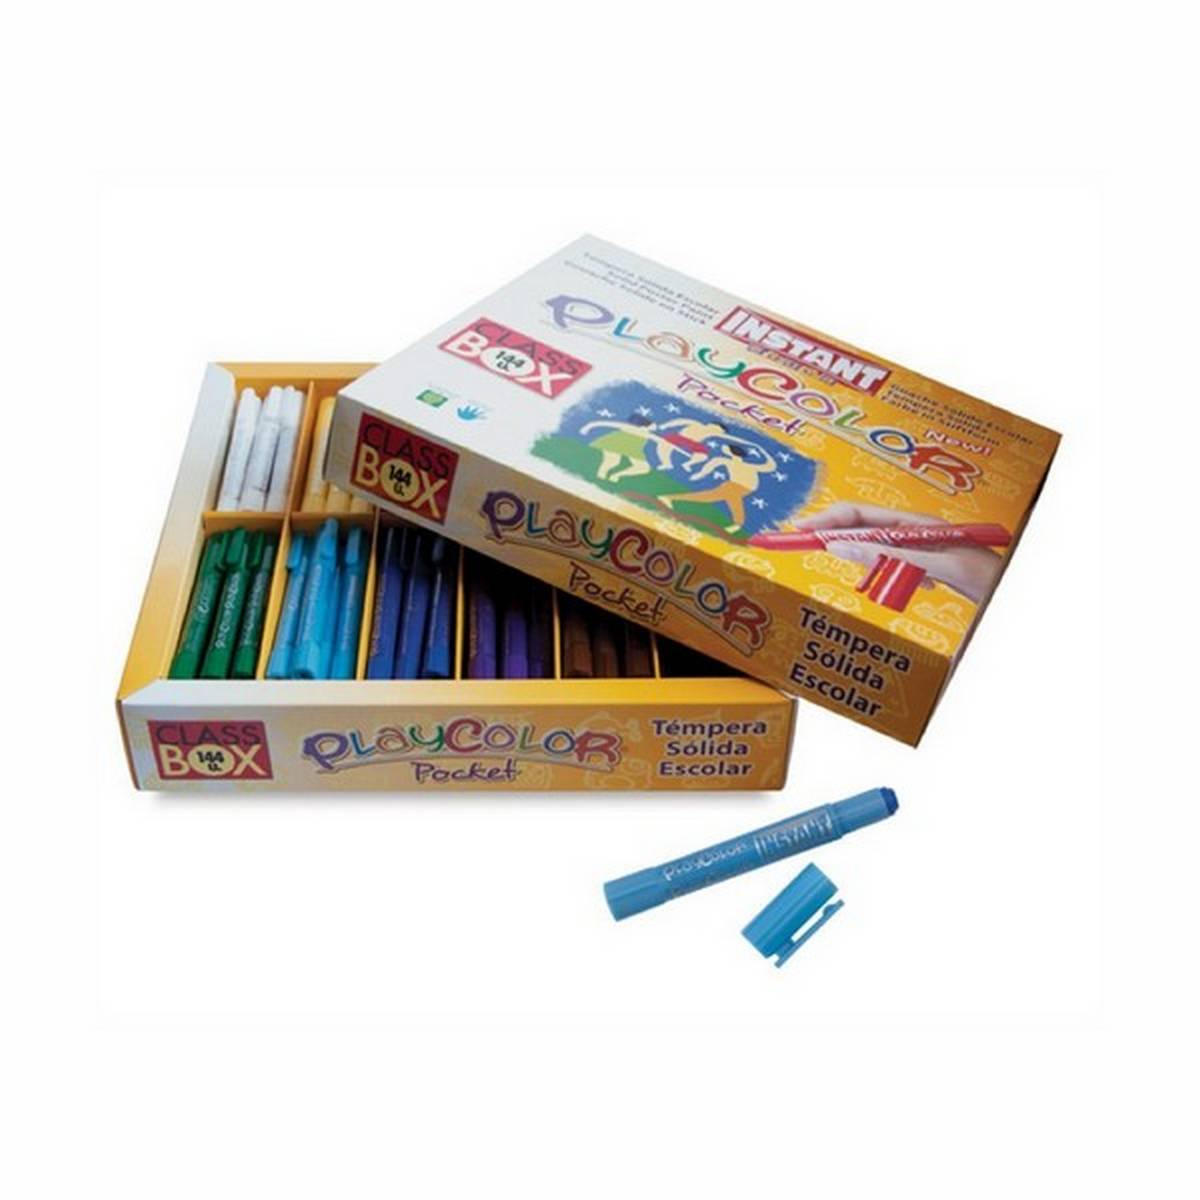 Playcolour Pocket Class Pack Set Of 144